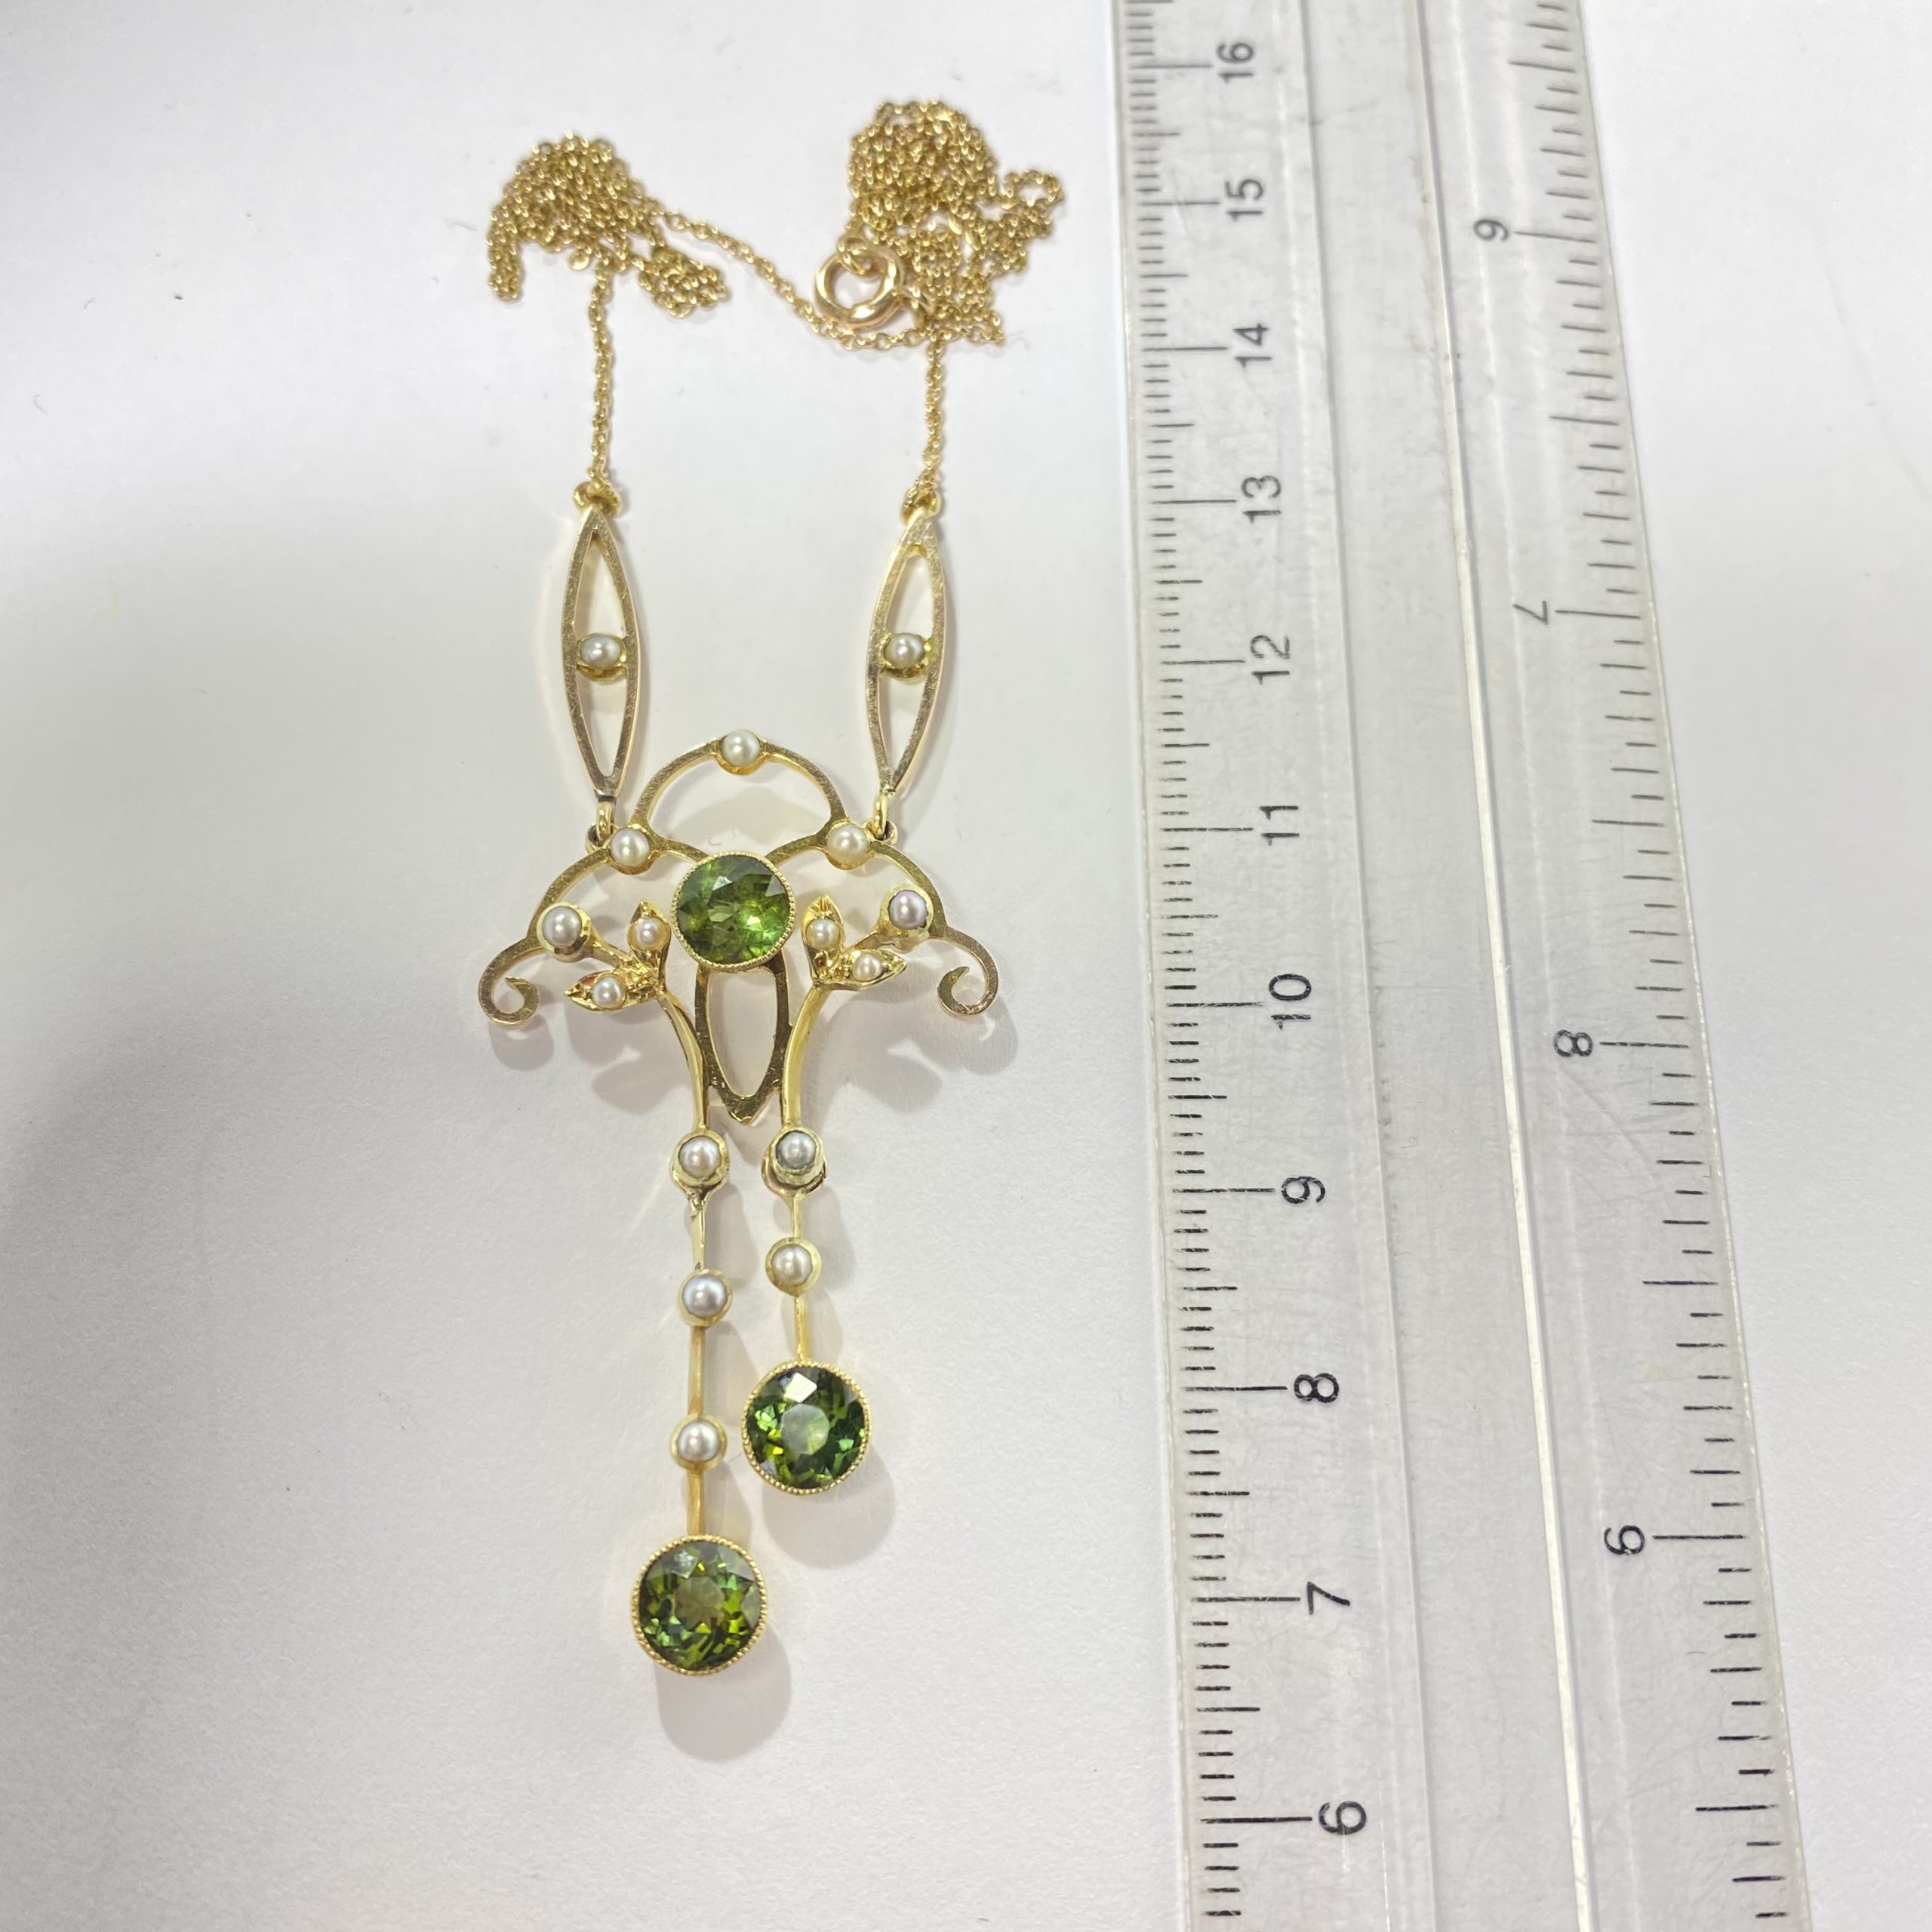 Peridot Lariat Necklace and Earrings Set #2 – BE MOMO